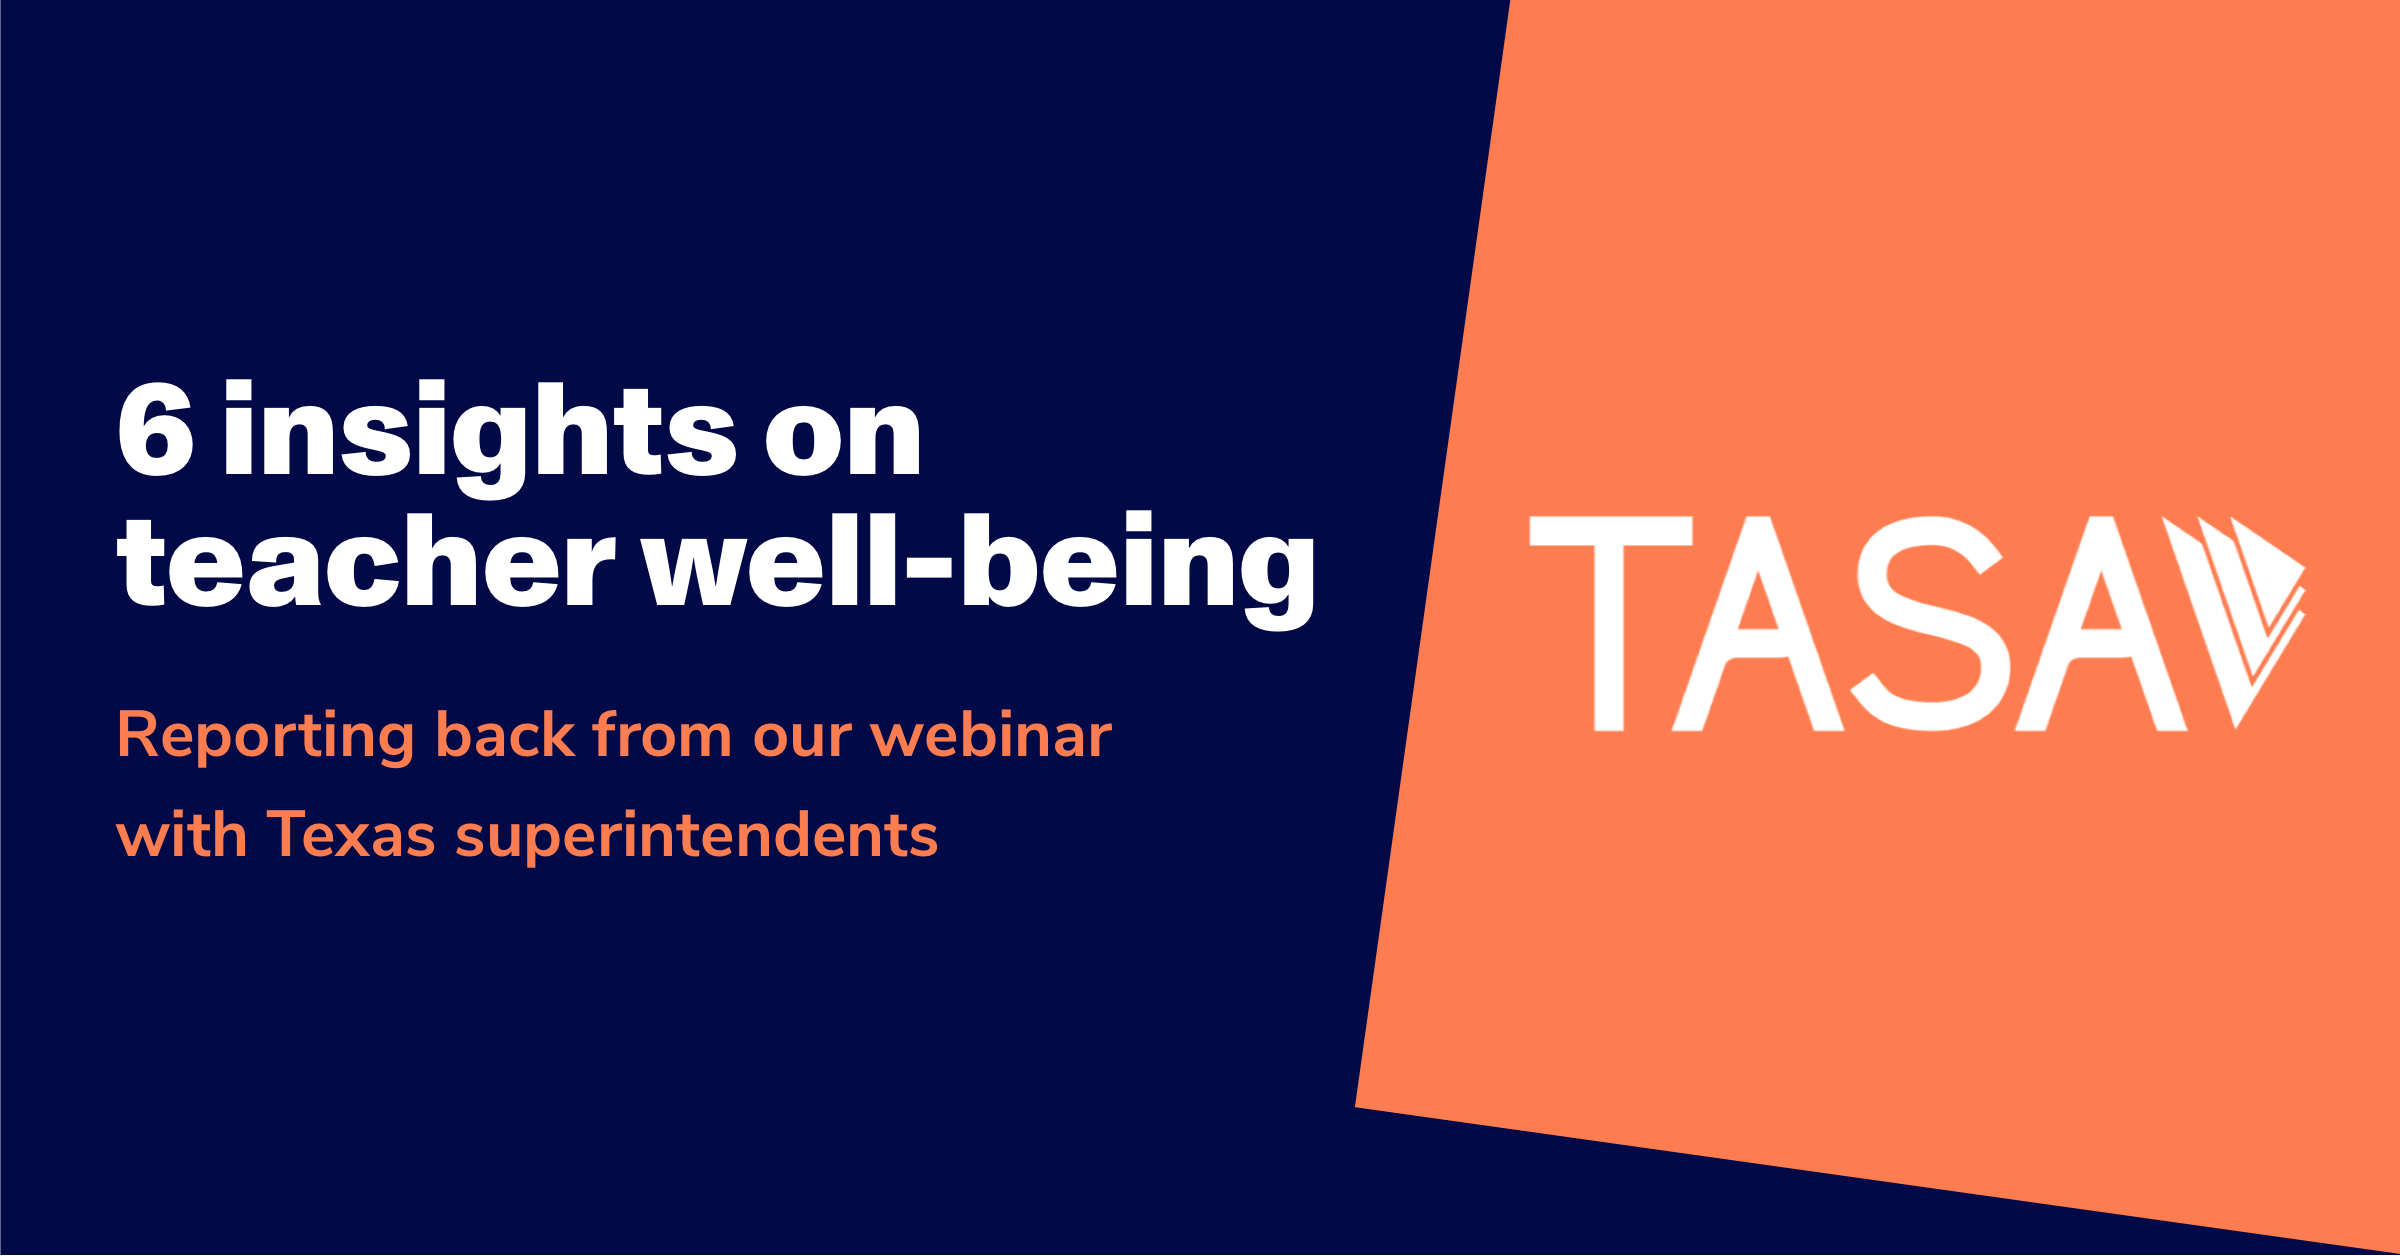 6 insights on teacher well-being: Reporting back from our webinar with Texas superintendents